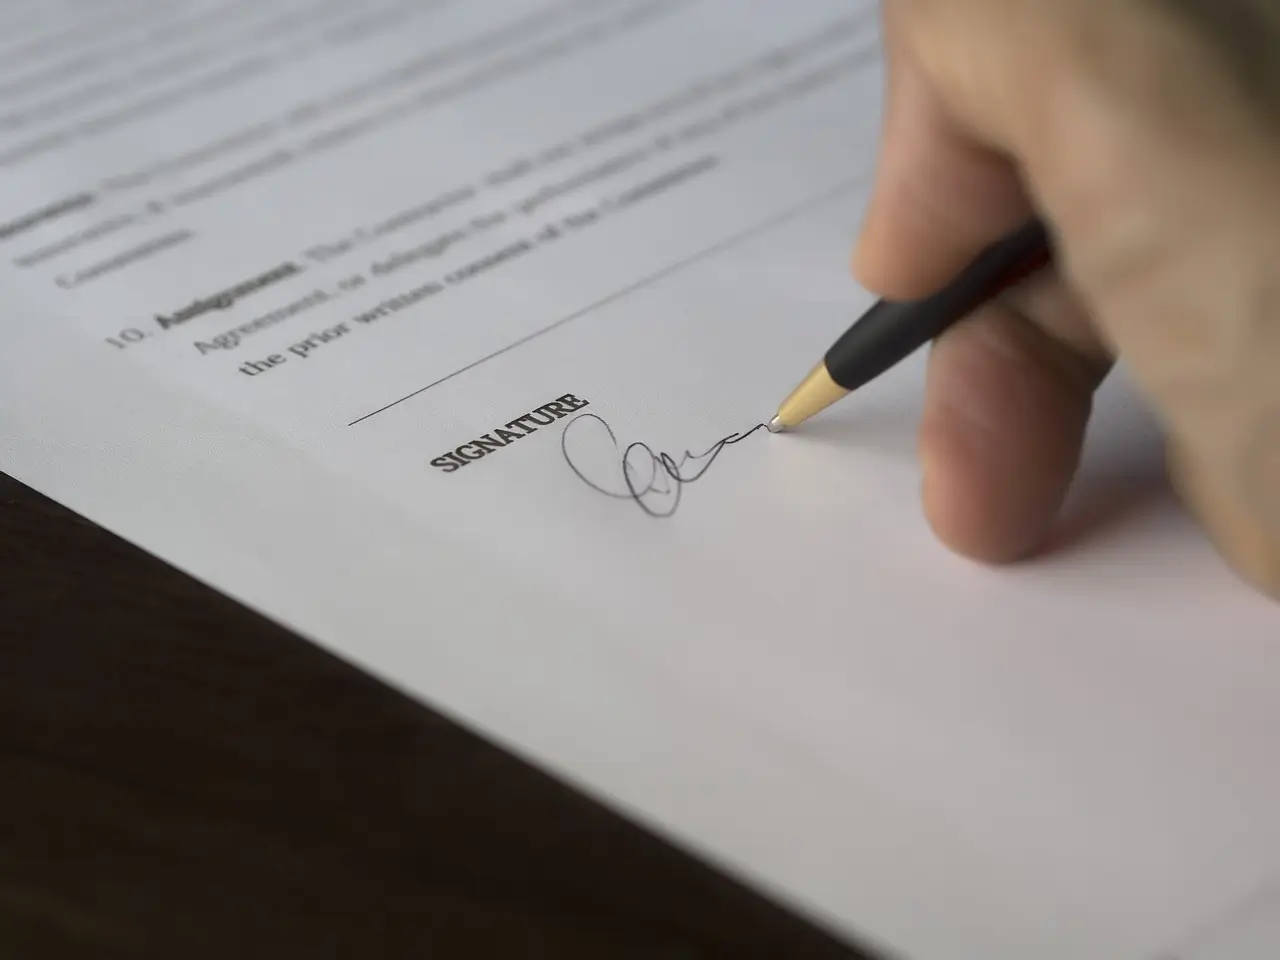 Someone signing a contract with a pen